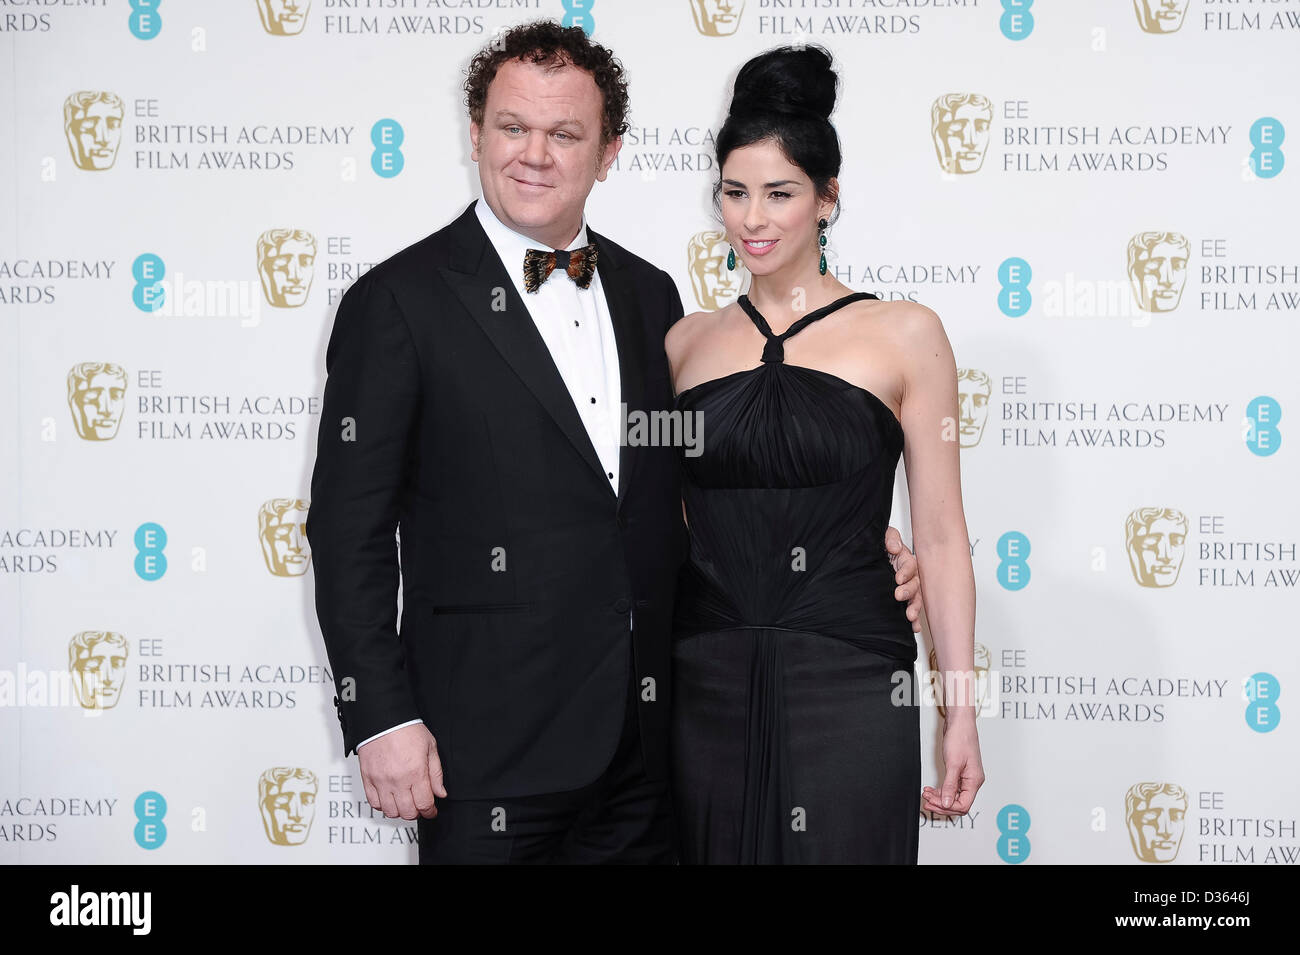 London, UK. Feb 10th, 2013. Presenters John C. Reilly and Sarah Silverman pose in the press room at the EE British Academy Film Awards at The Royal Opera House on February 10, 2013 in London, England. Credit: London Entertainment/Alamy Live News Stock Photo